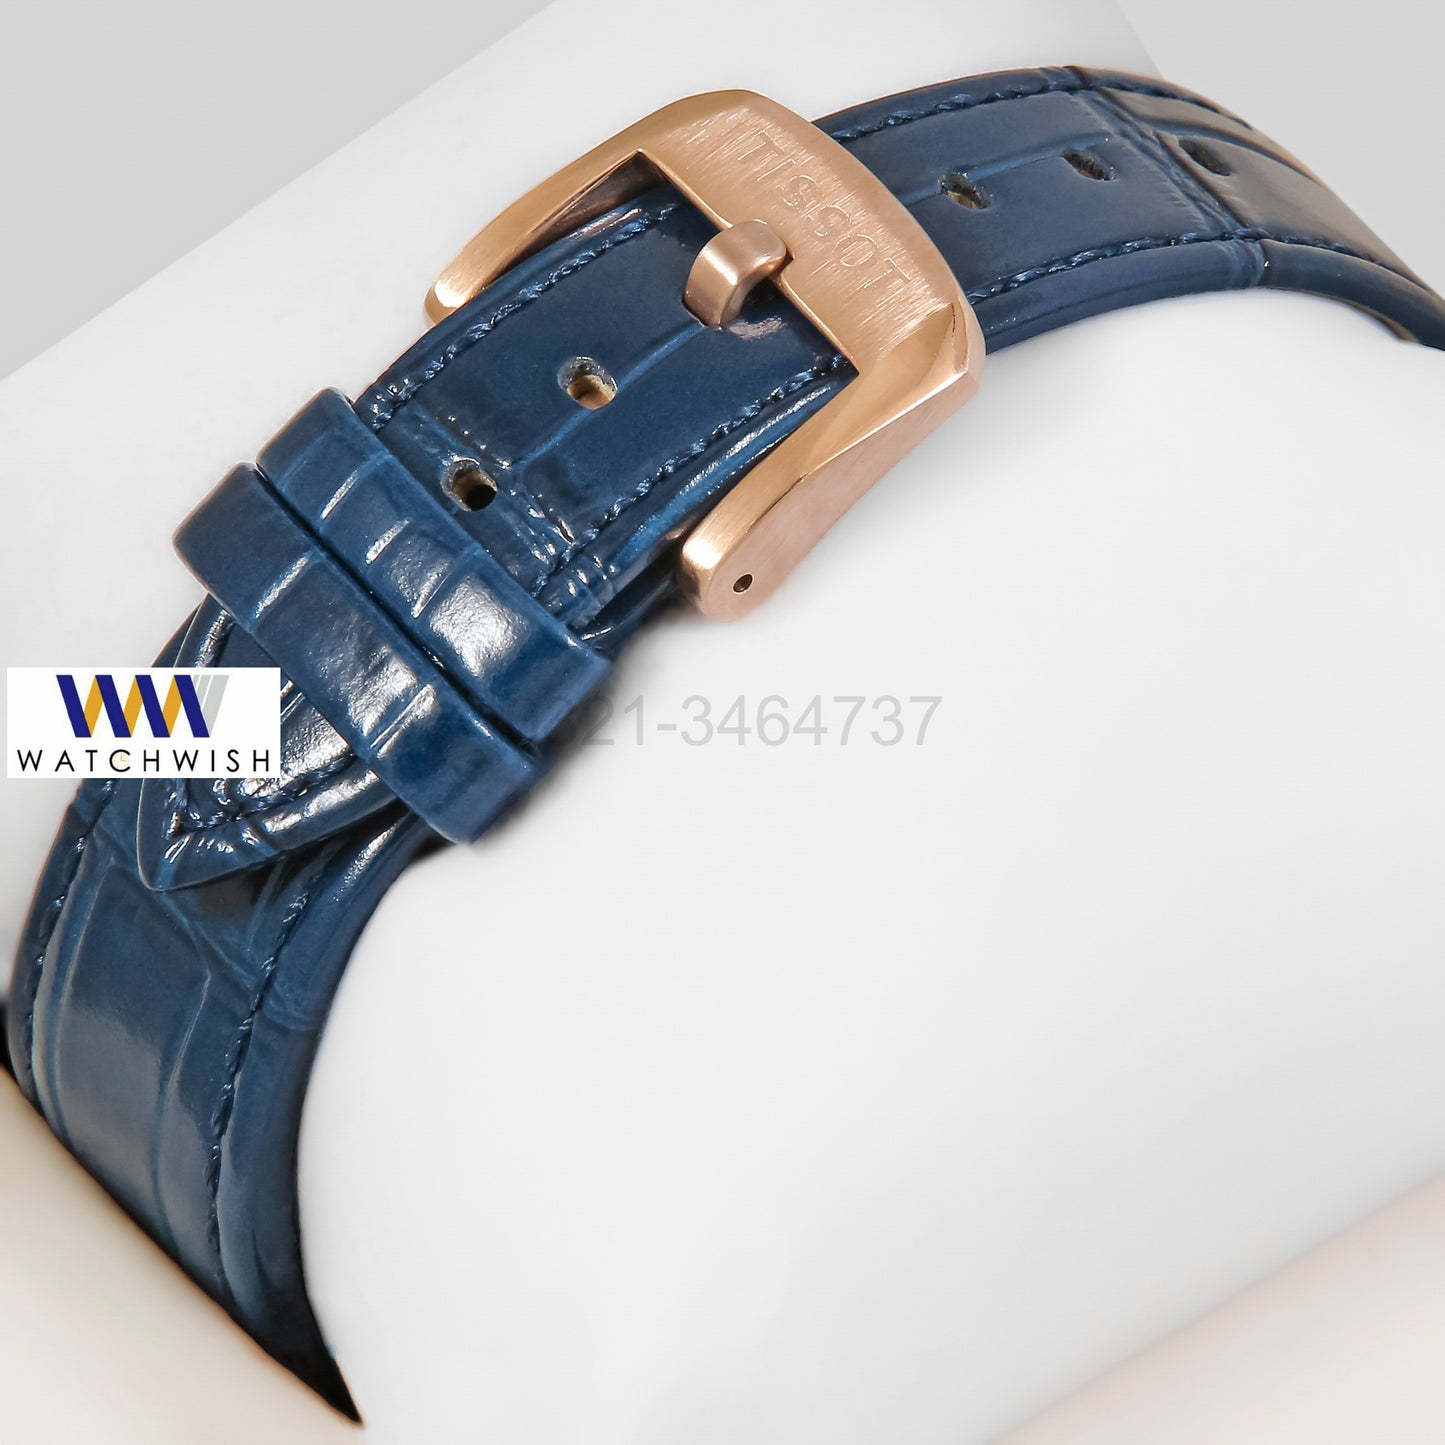 LATEST COLLECTION PRX ROSE GOLD CASE WITH BLUE DIAL & LEATHER STRAP